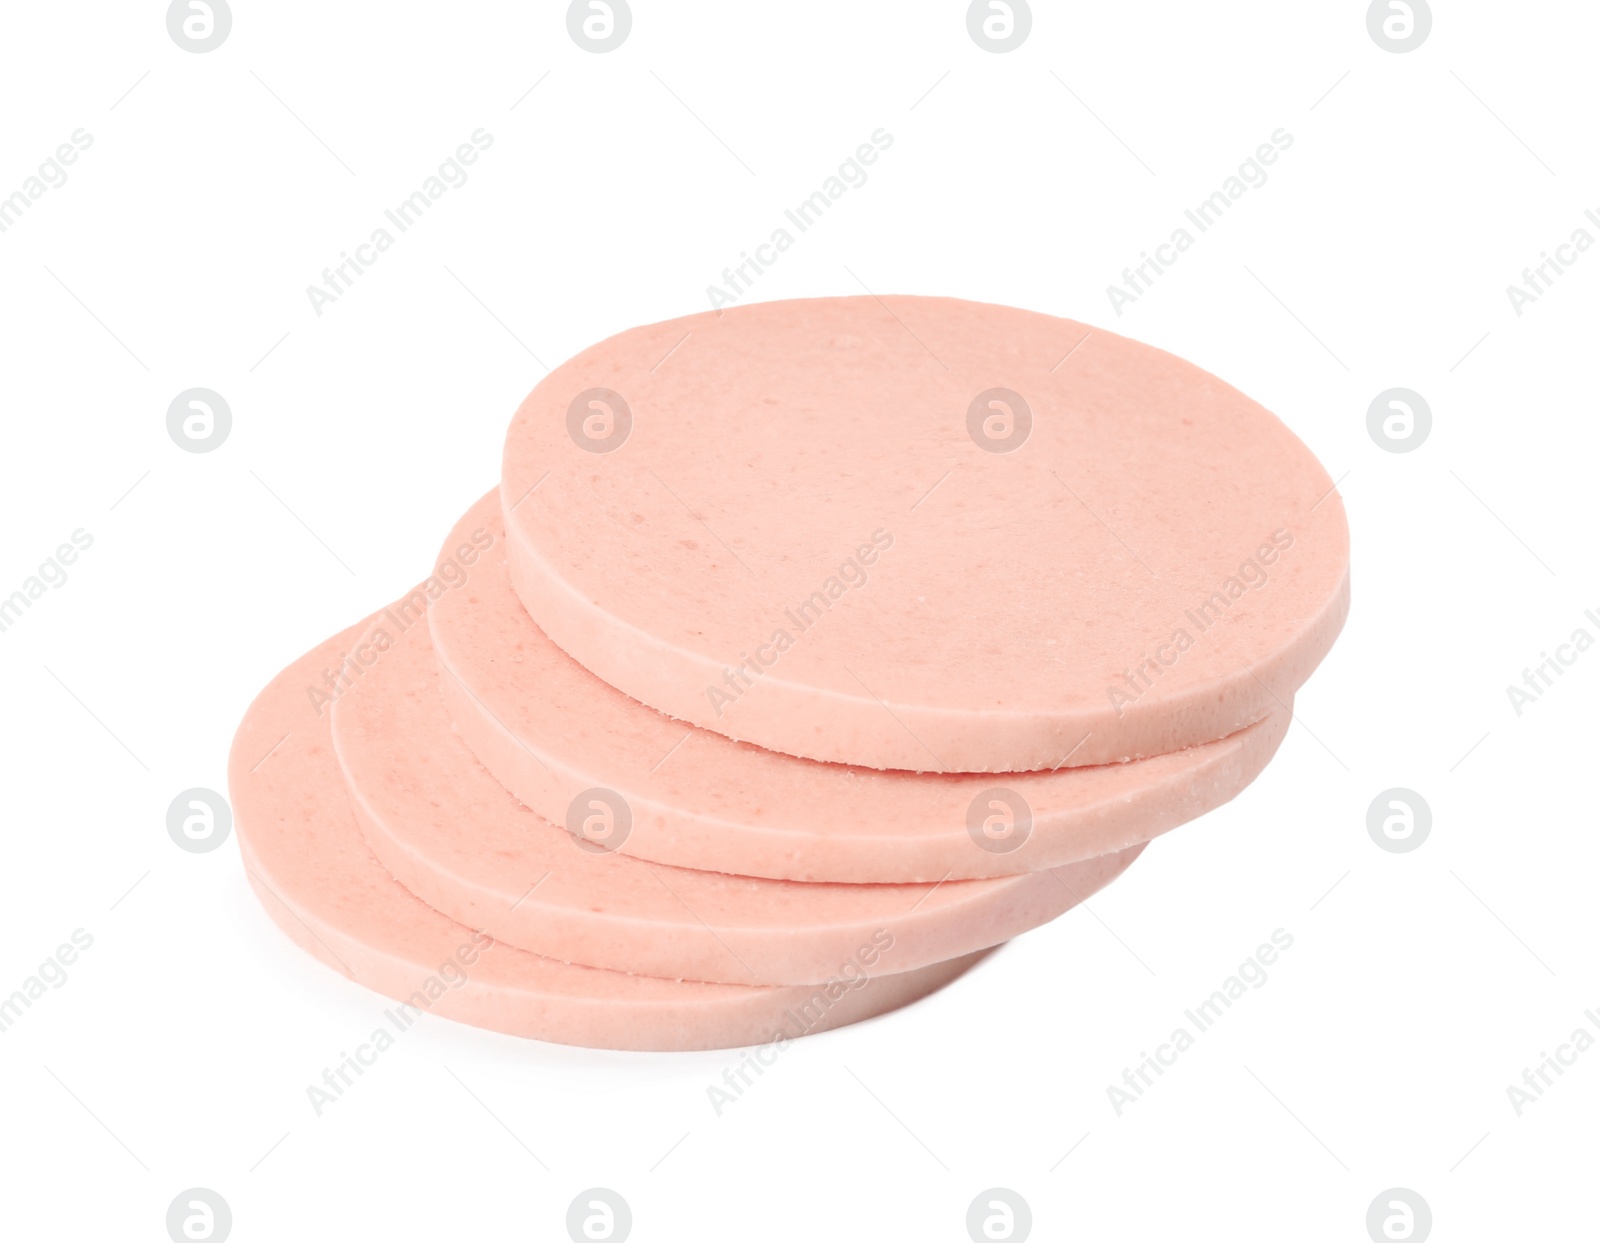 Photo of Slices of delicious boiled sausage on white background